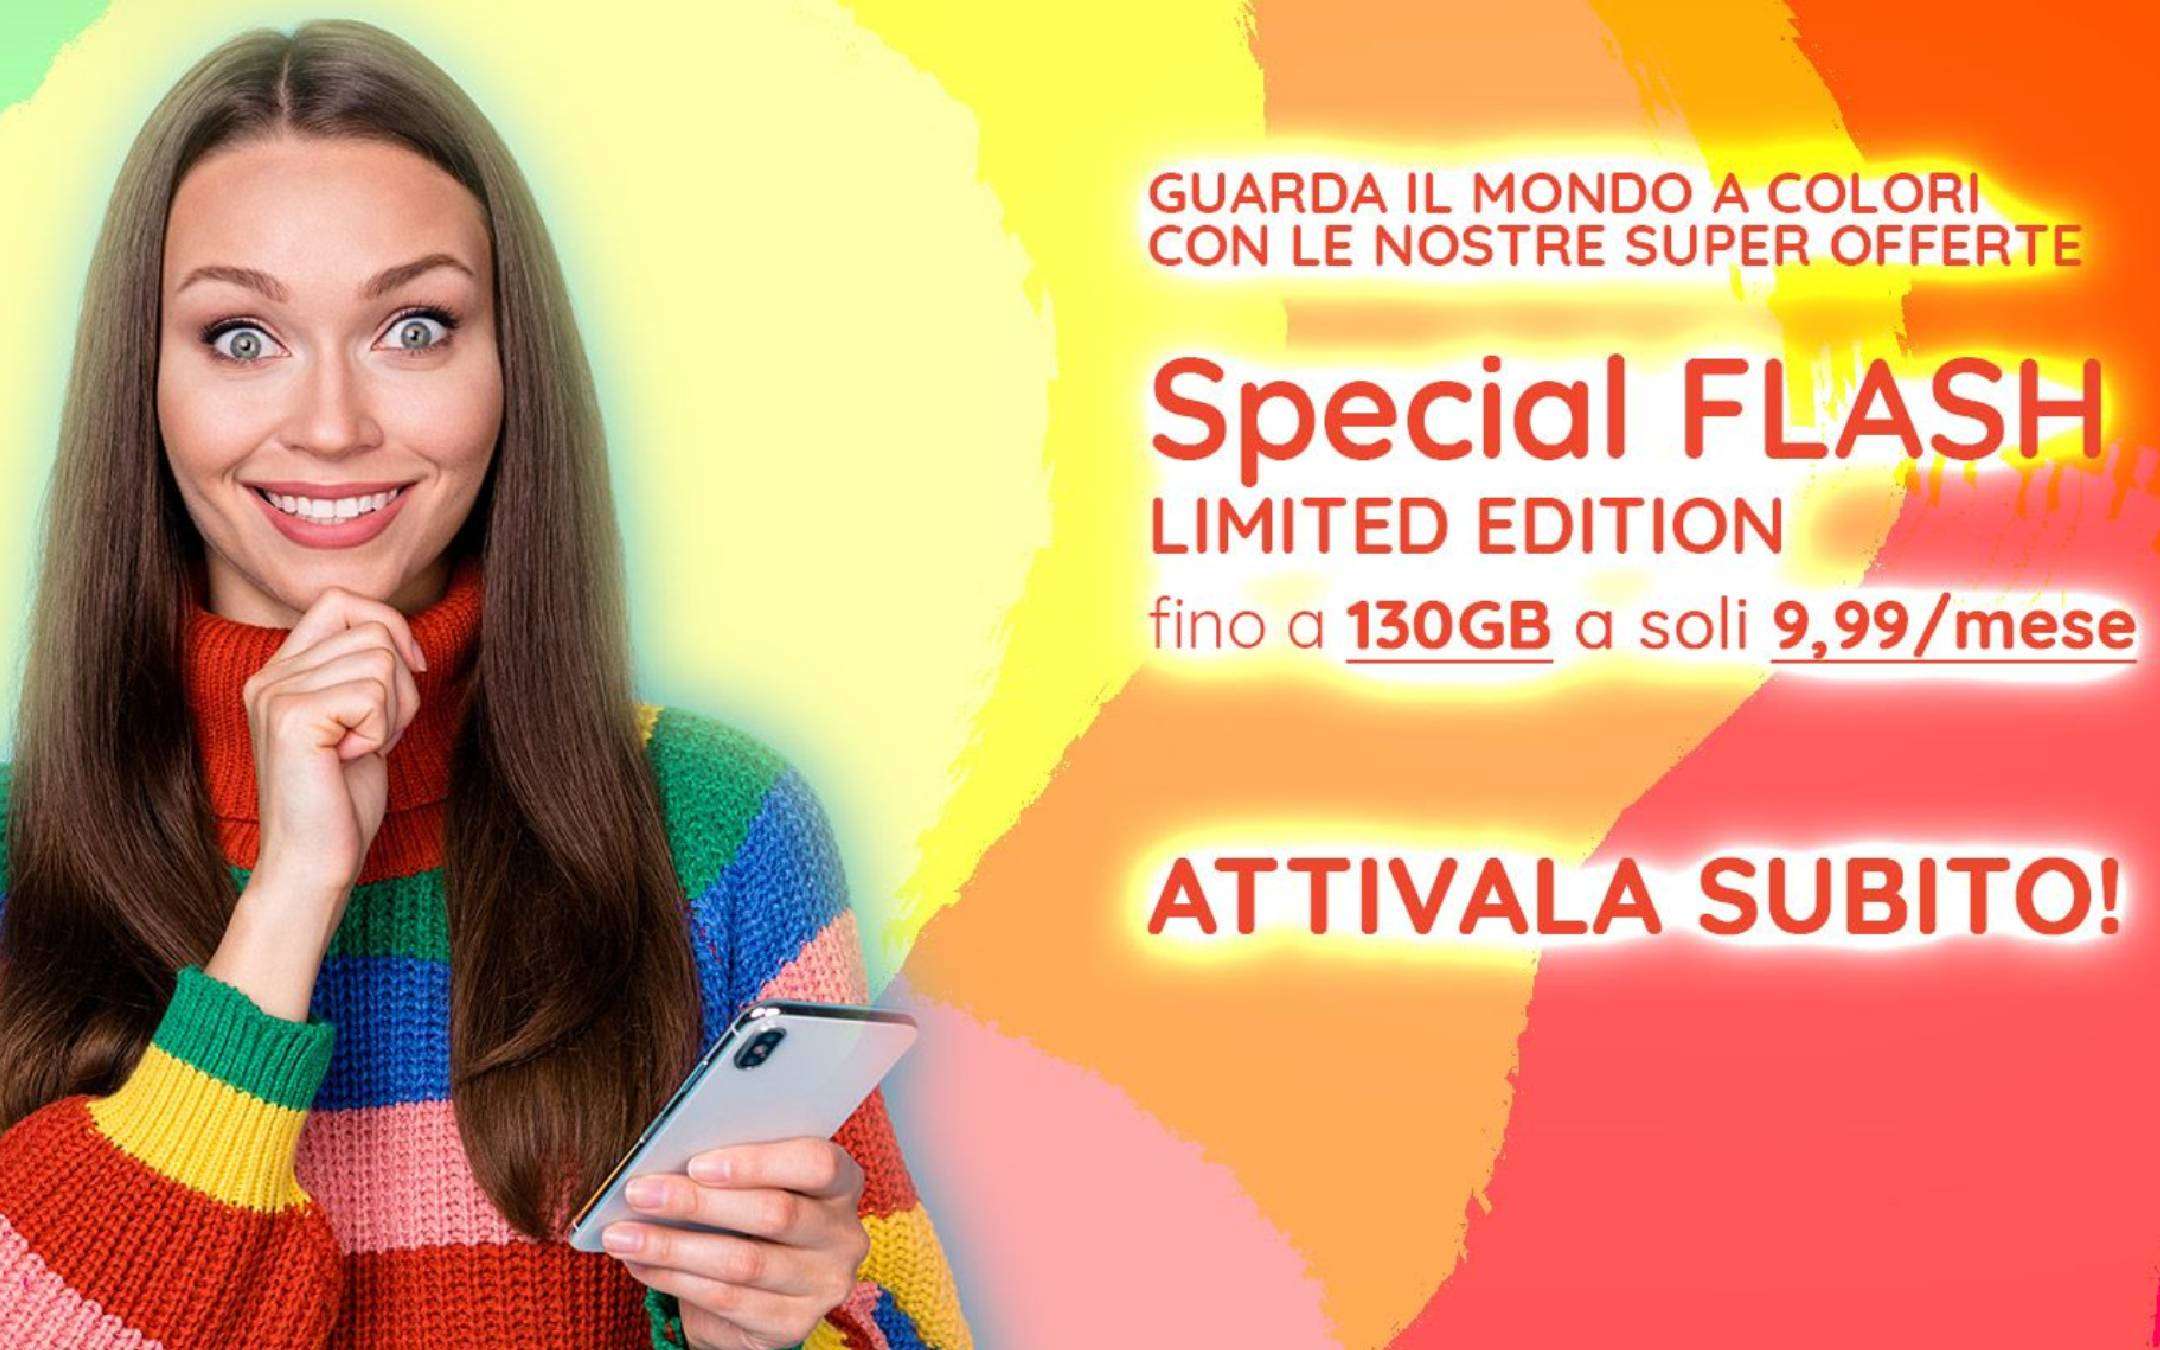 Special Flash Limited Edition: 130GB a soli 9,99€